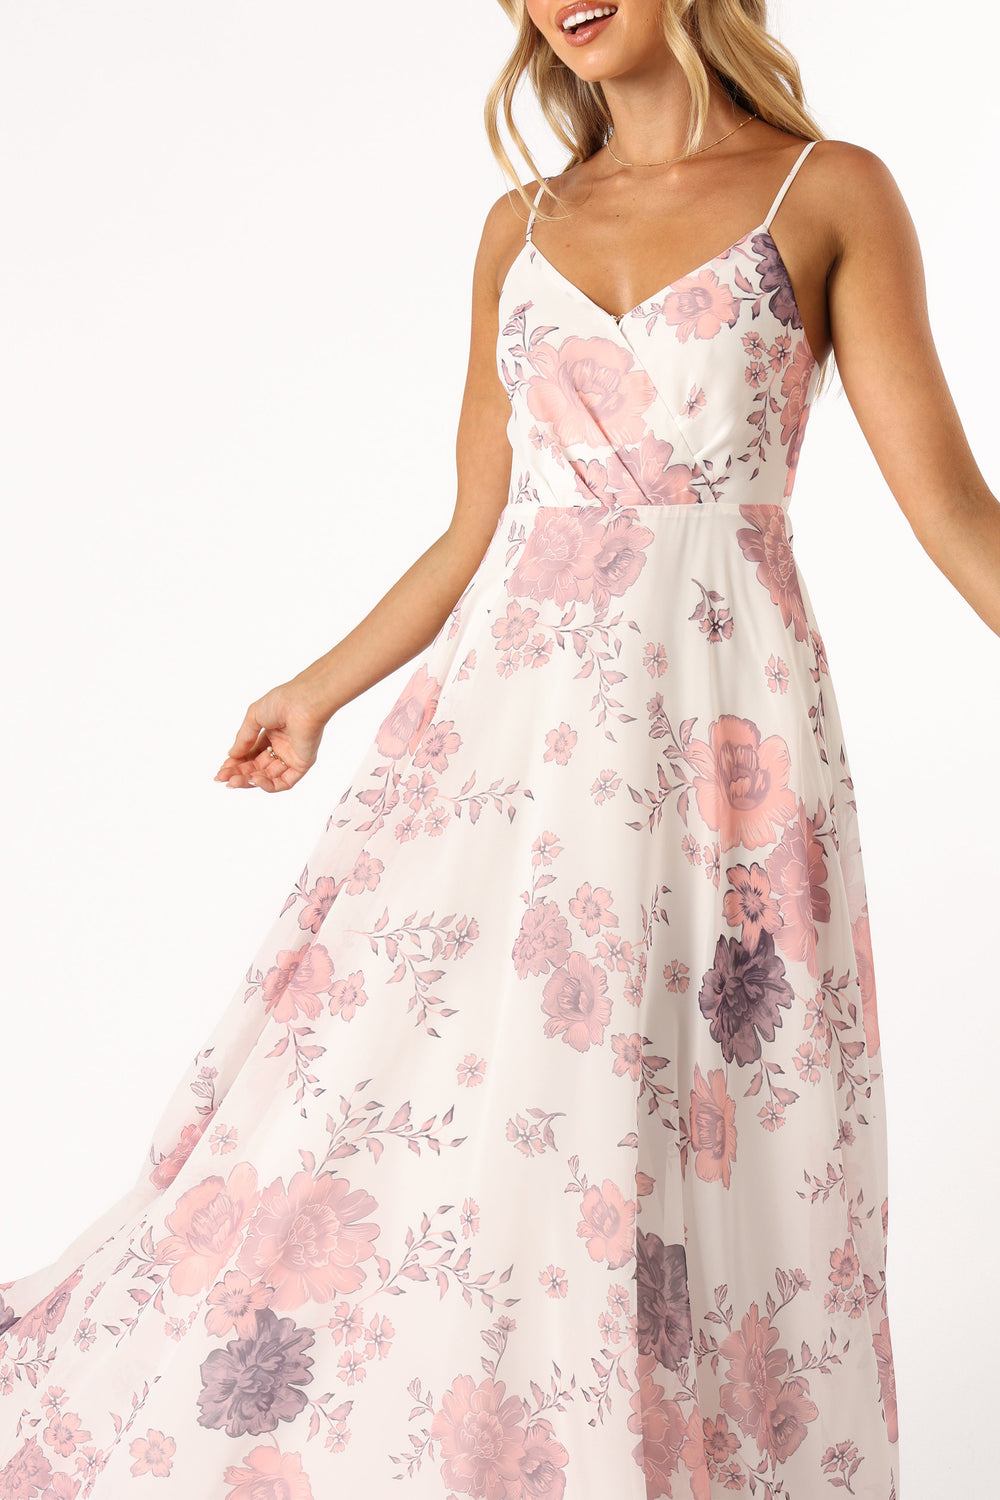 Petal and Pup USA DRESSES Madilyn Maxi Dress - White Floral